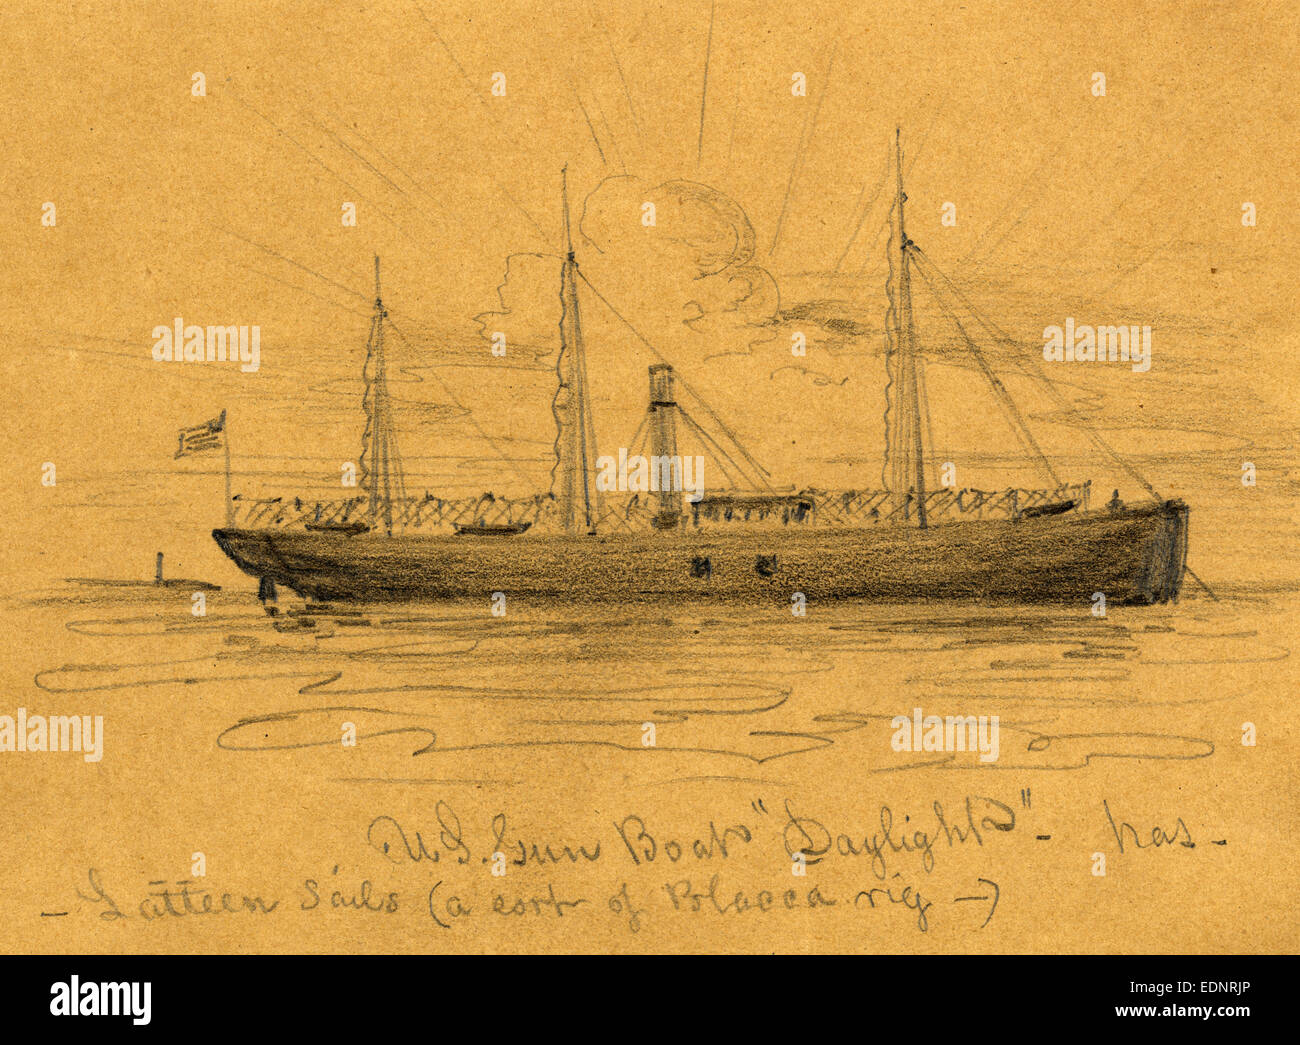 U.S. Gun Boat Daylight, between 1860 and 1865, drawing on brown paper pencil, 10.2 x 14 cm. (sheet), 1862-1865, by Alfred R Waud Stock Photo